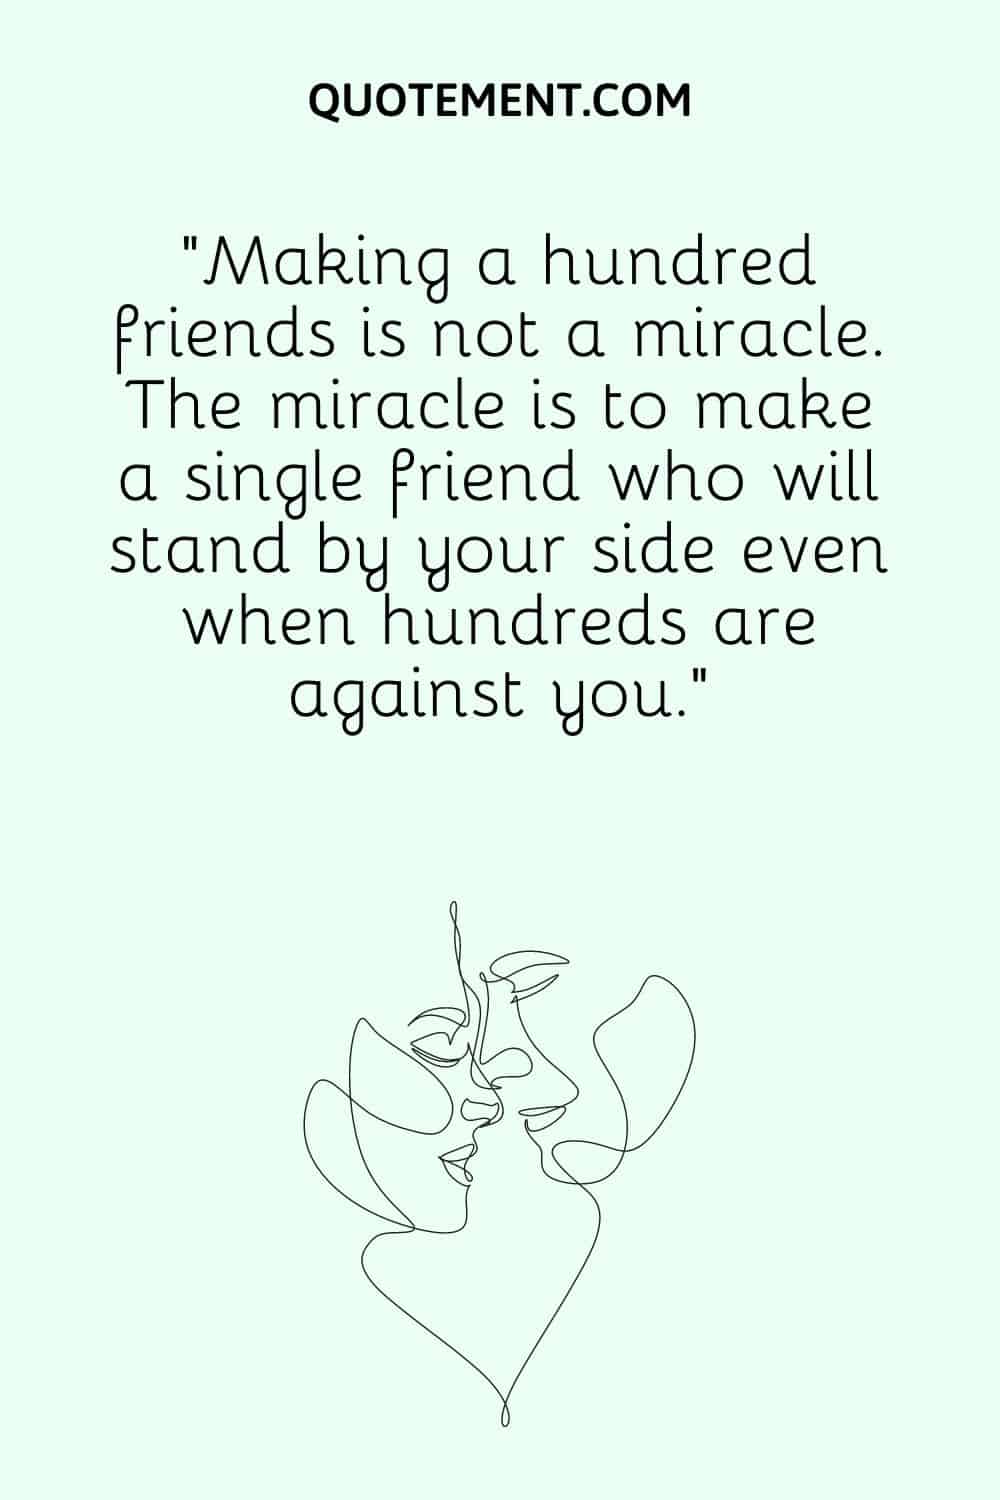 “Making a hundred friends is not a miracle. The miracle is to make a single friend who will stand by your side even when hundreds are against you.”